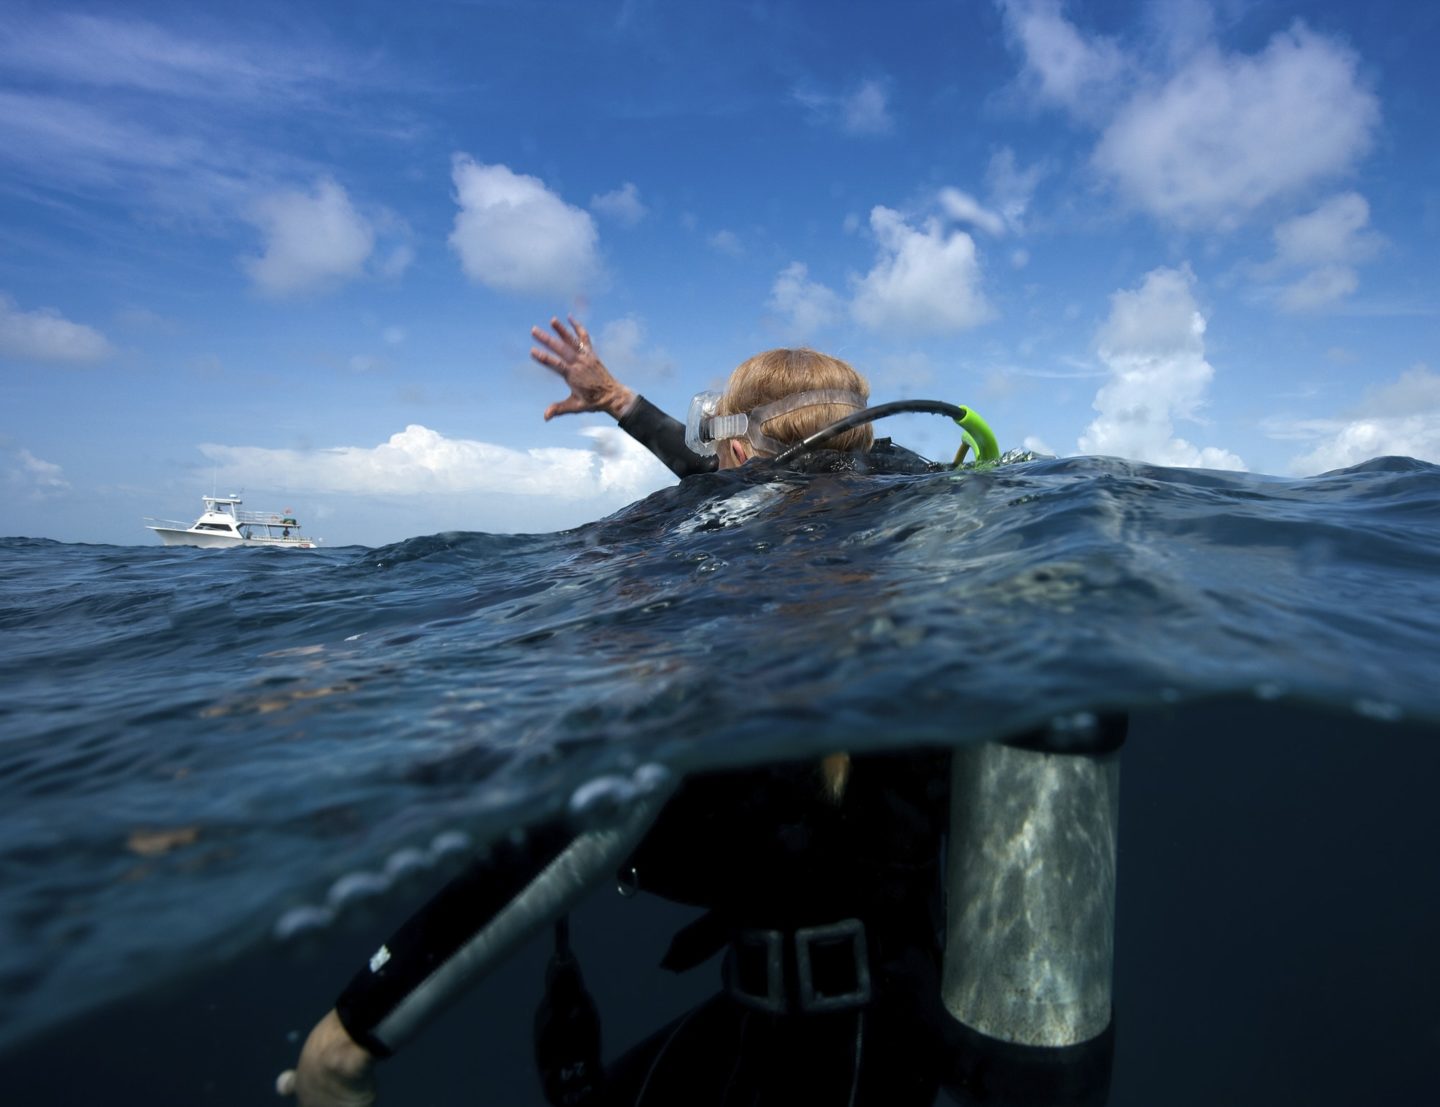 Scuba diver waves one arm to show distress and that she requires assistance.